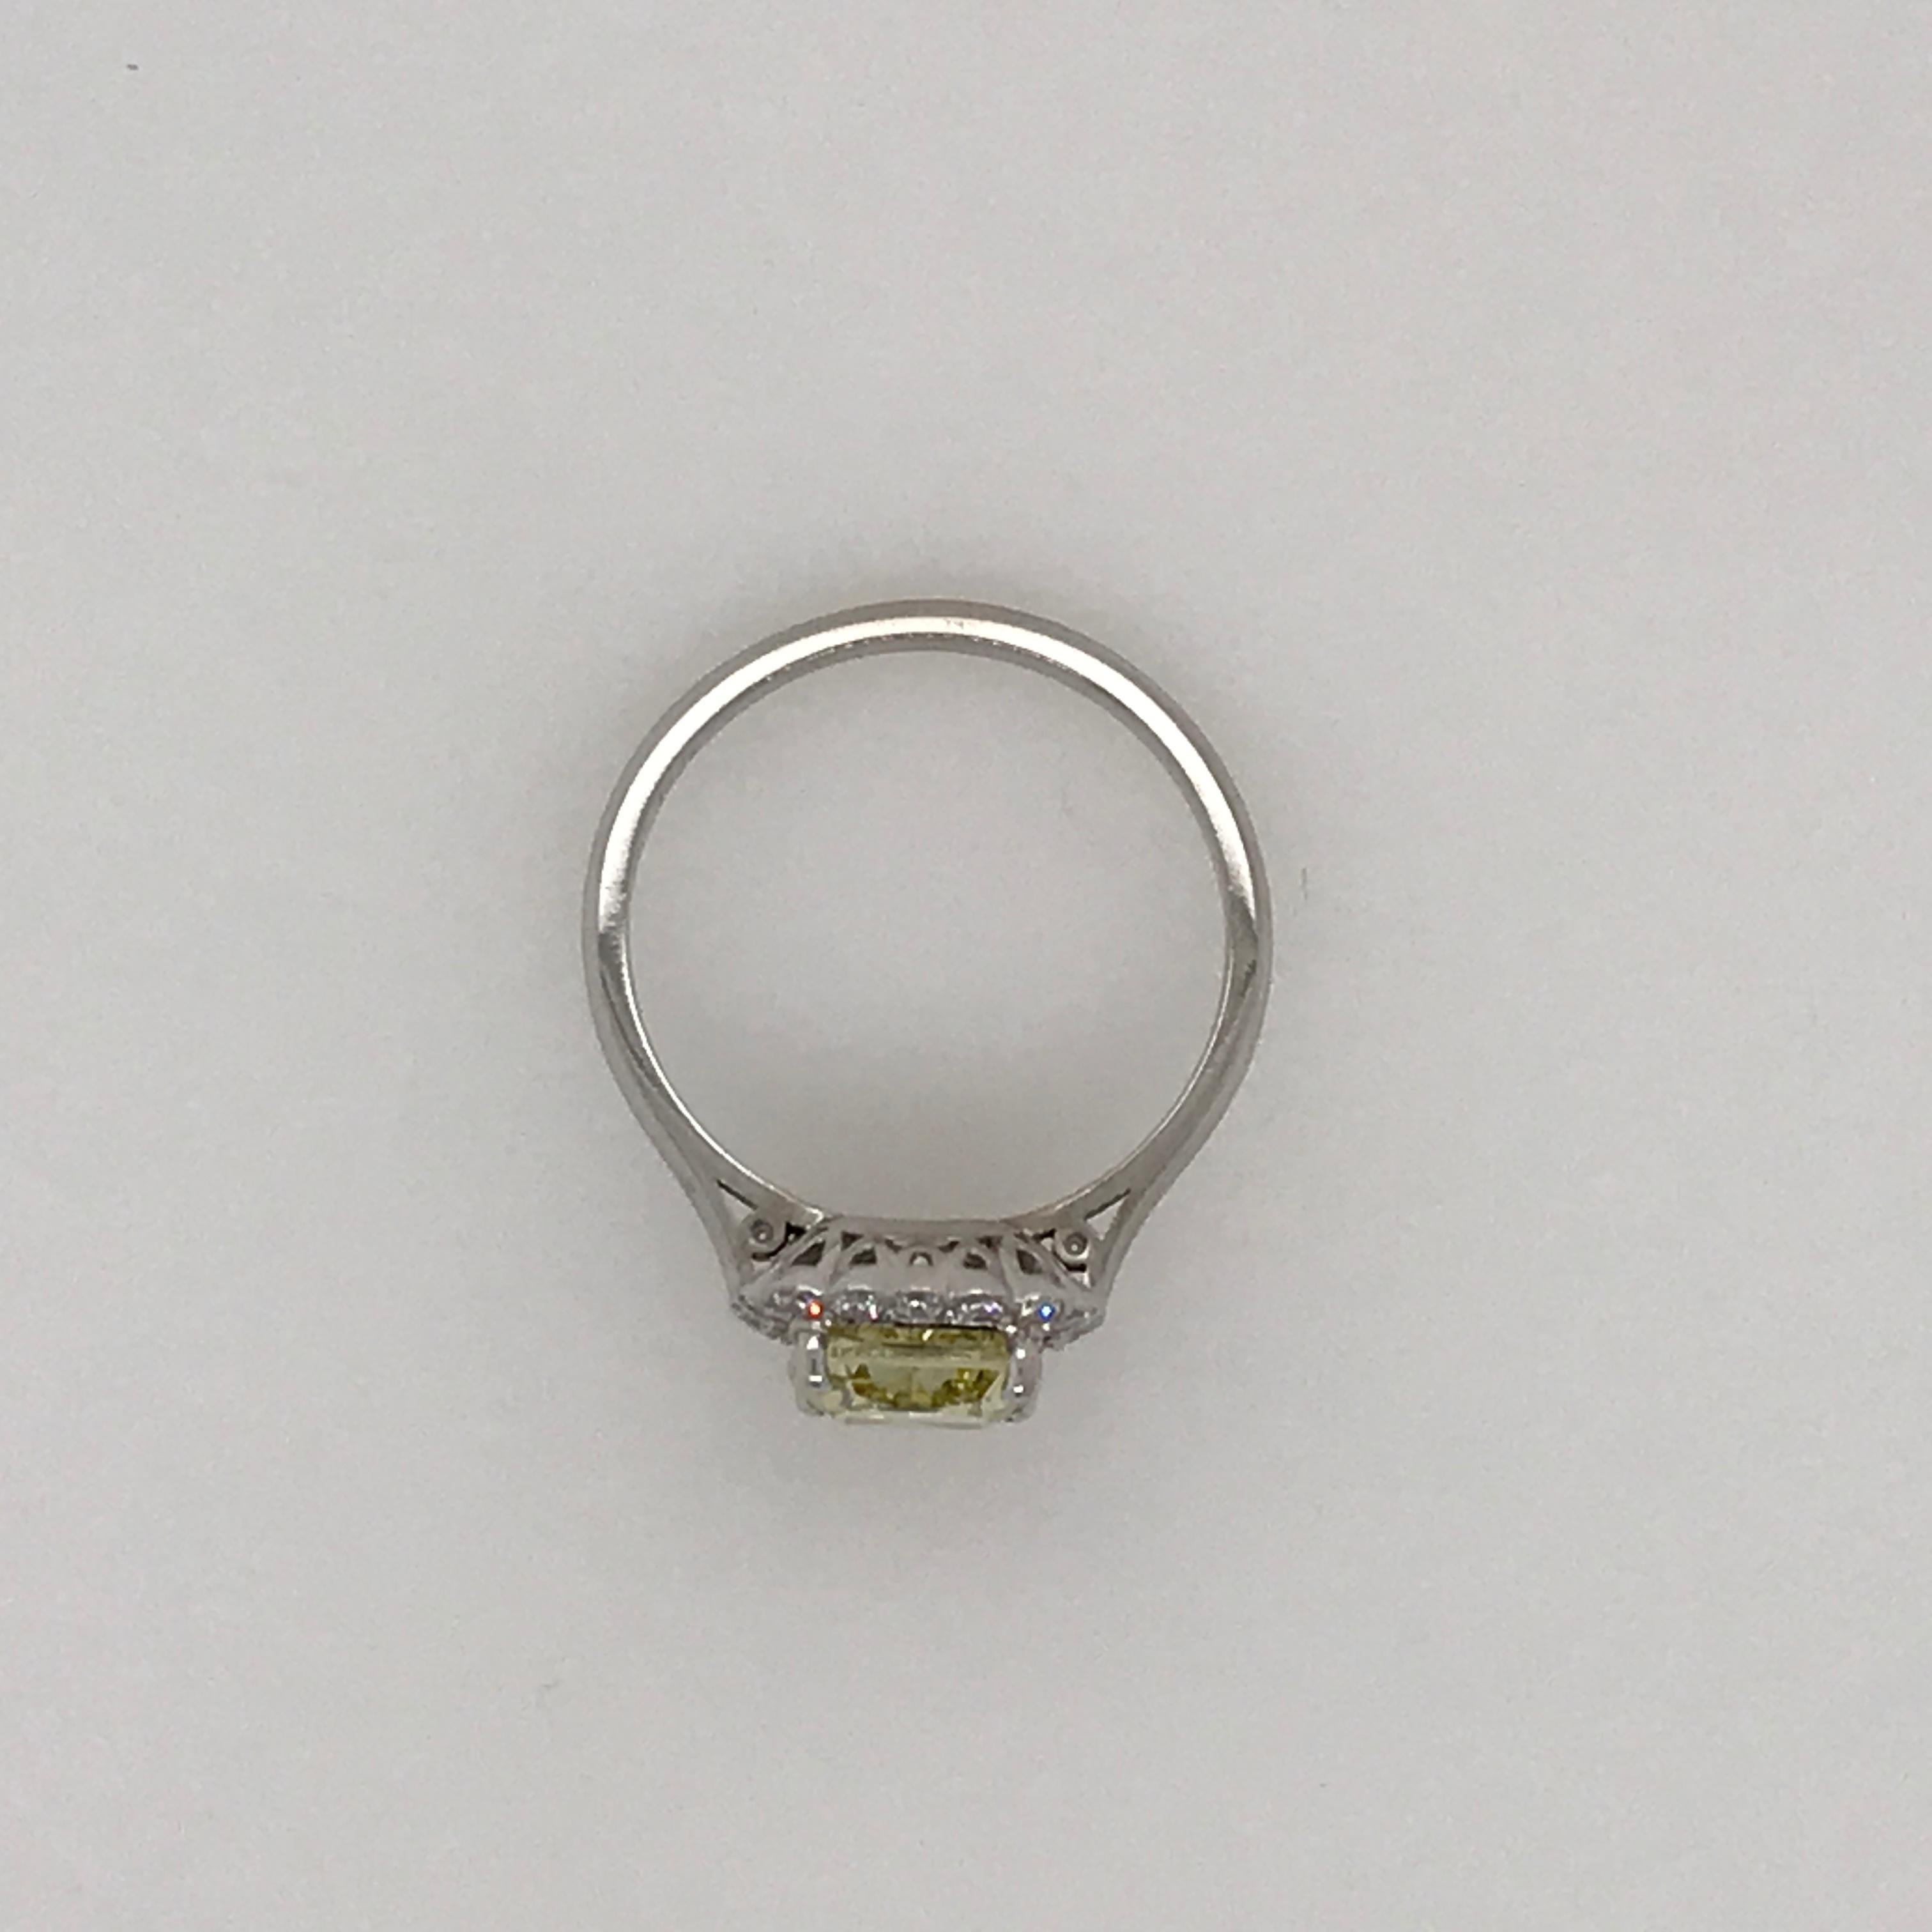 Fancy Intense Yellow Cushion Cut Diamond in Diamond Scalloped Cluster Ring 18ct In Excellent Condition For Sale In Armadale, Victoria